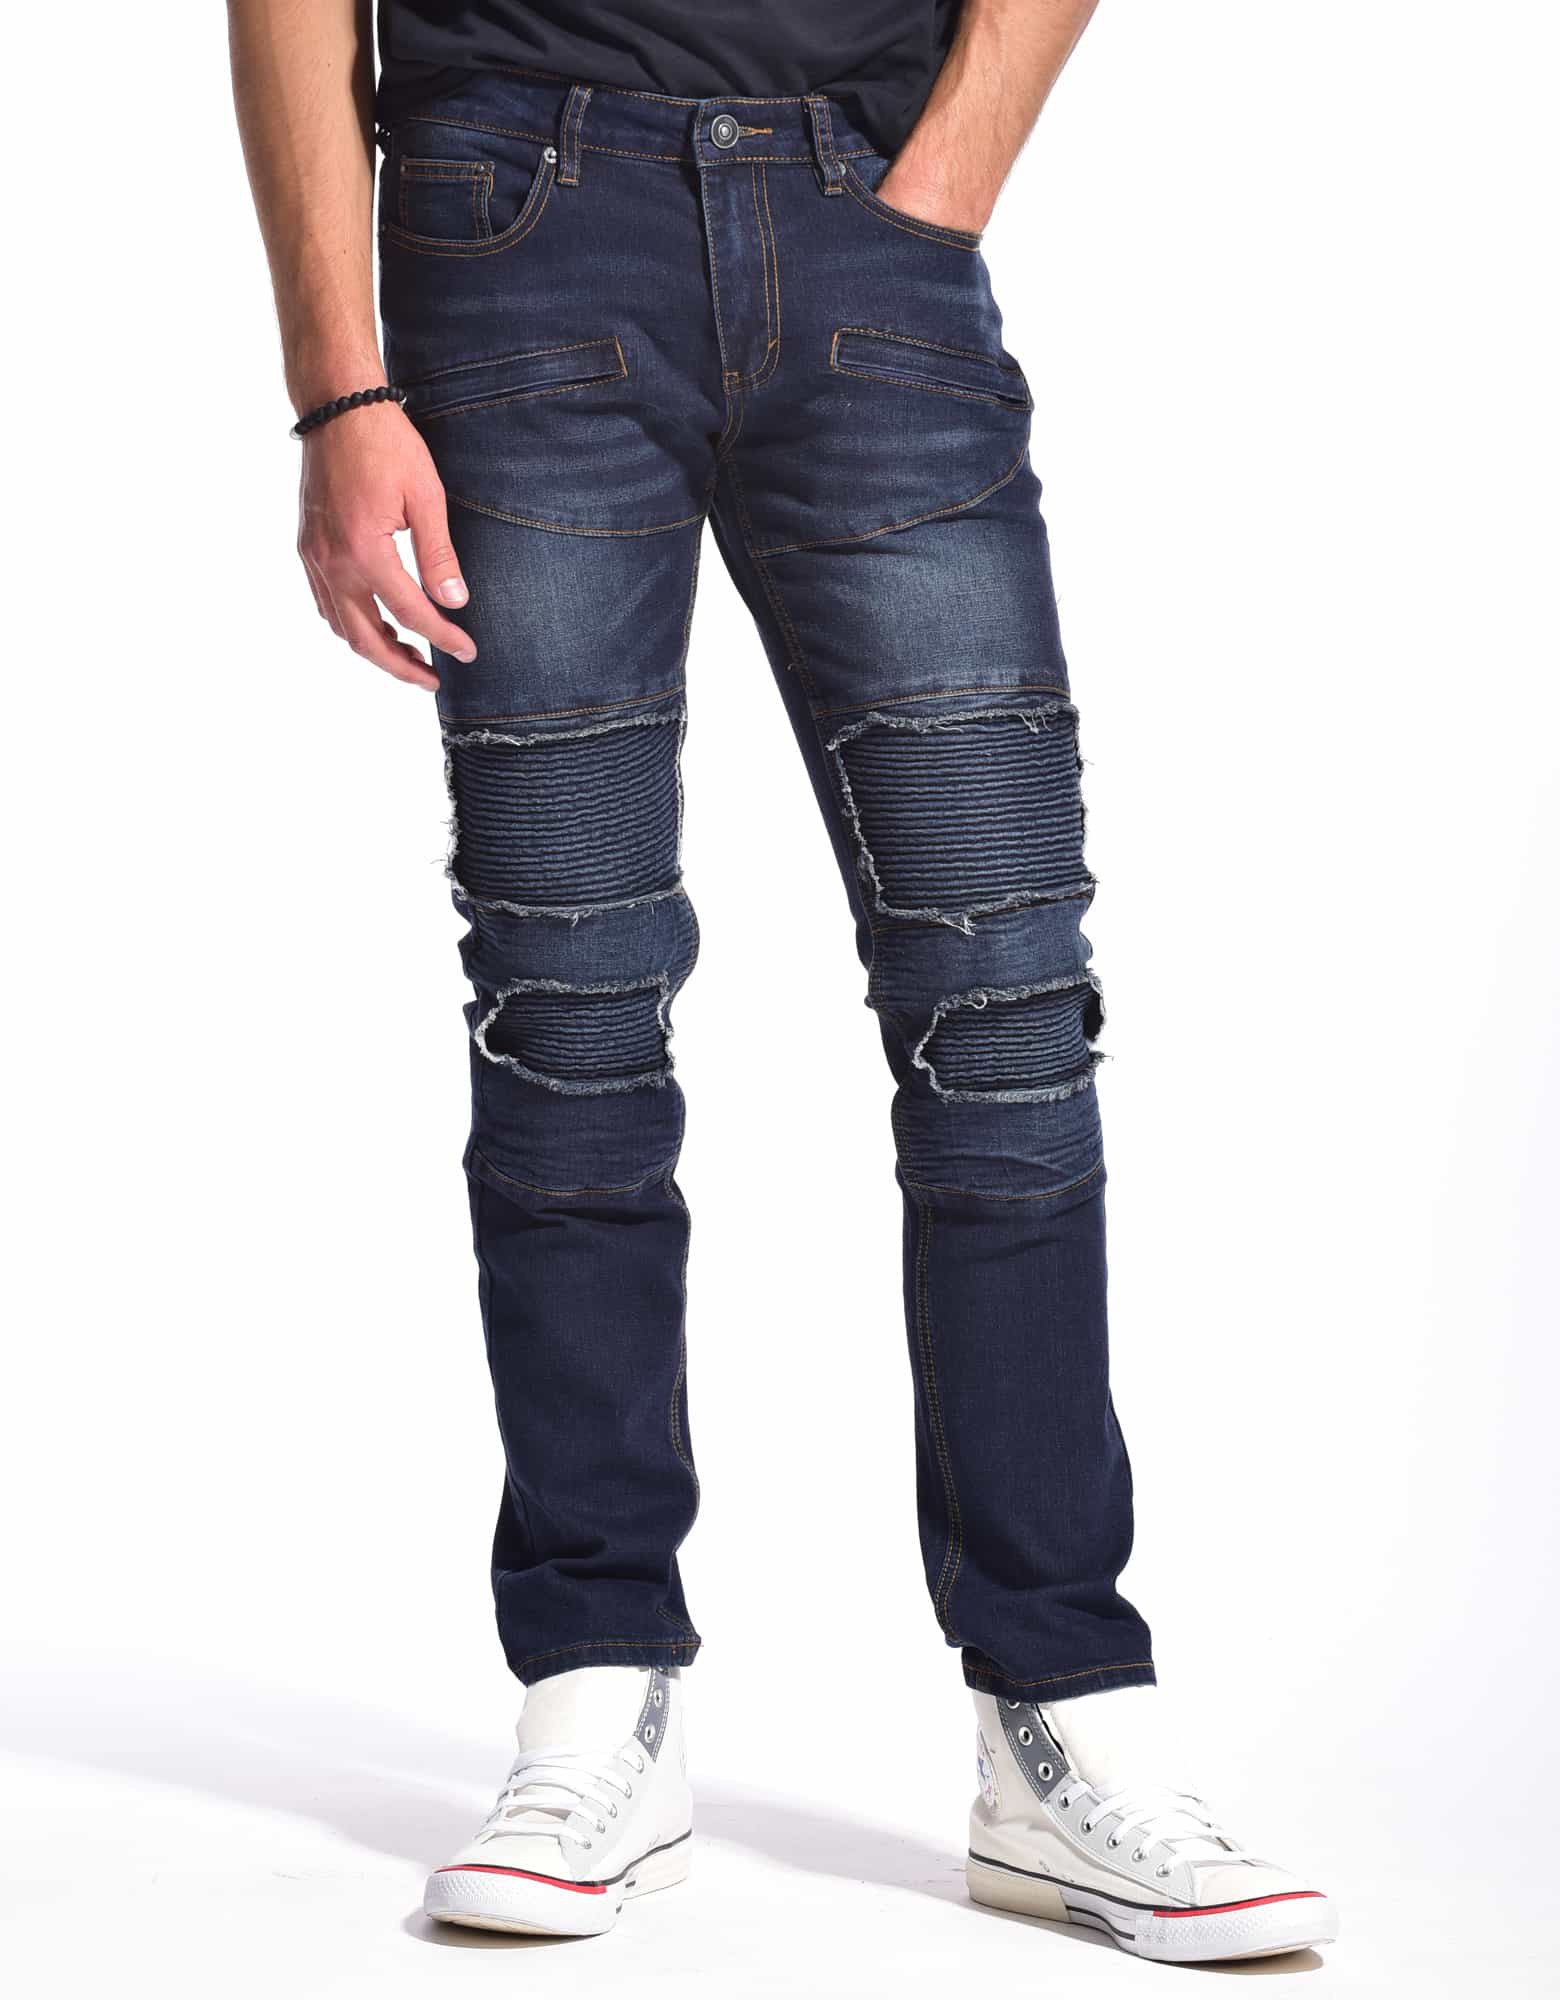 MEN'S MAMMOTH FIVE POCKETS MOTO SLIM FIT JEANS - image 1 of 11